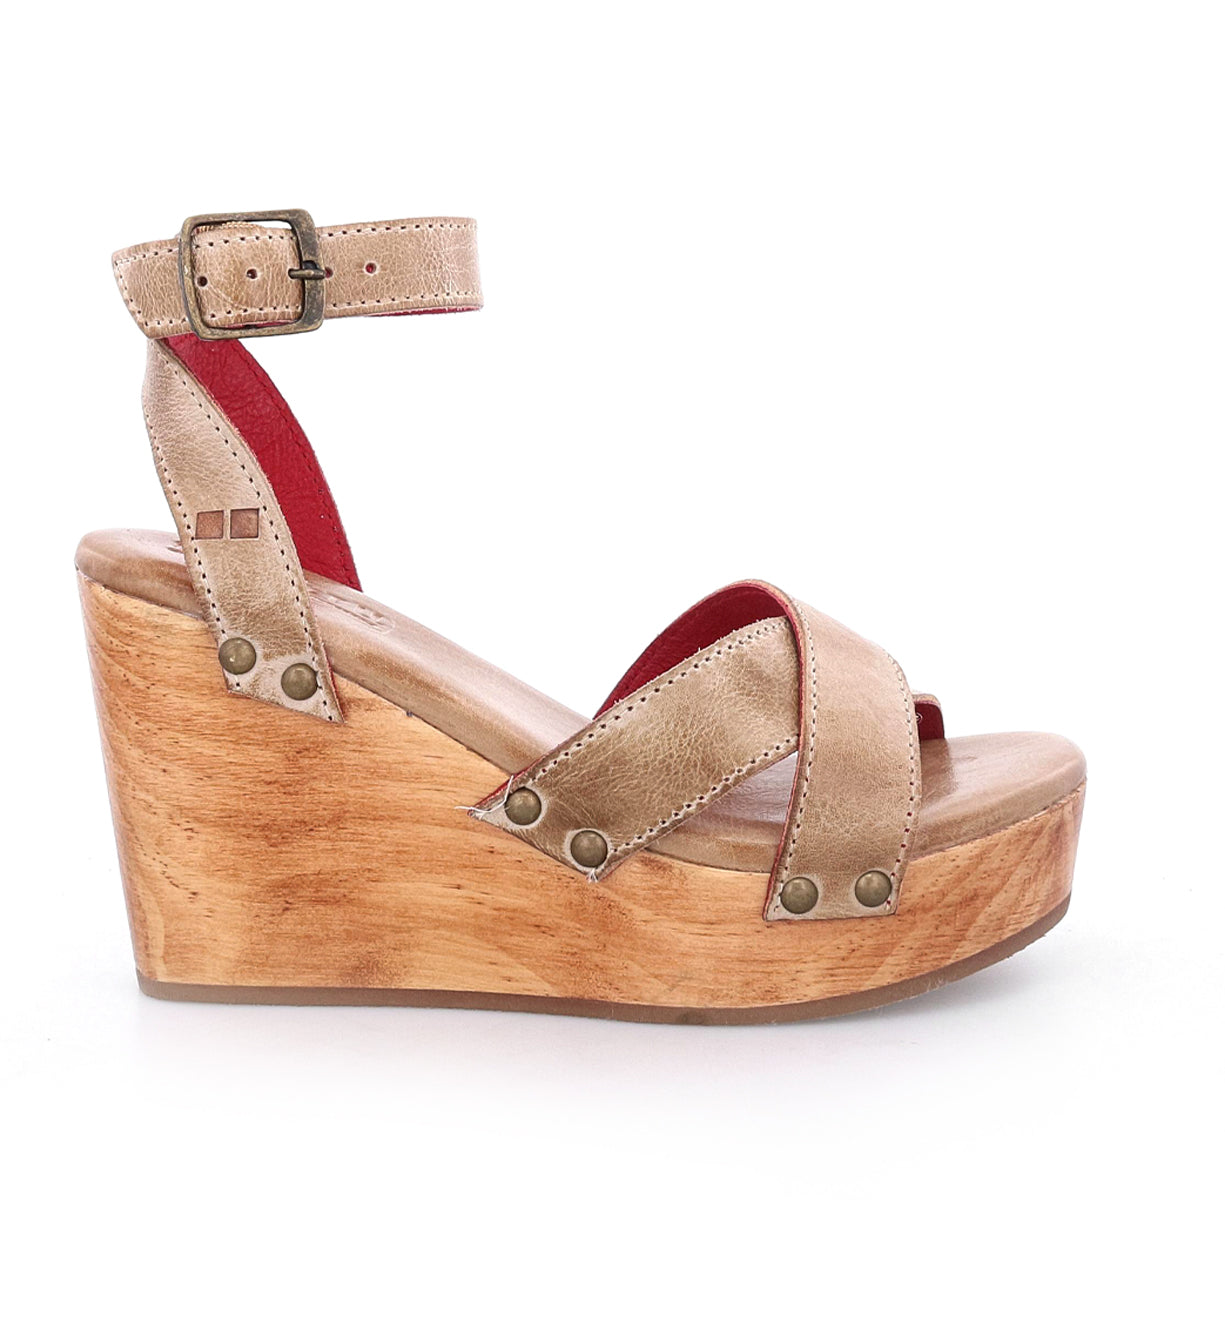 A women's Grettell sandal with a wooden platform and straps from Bed Stu.